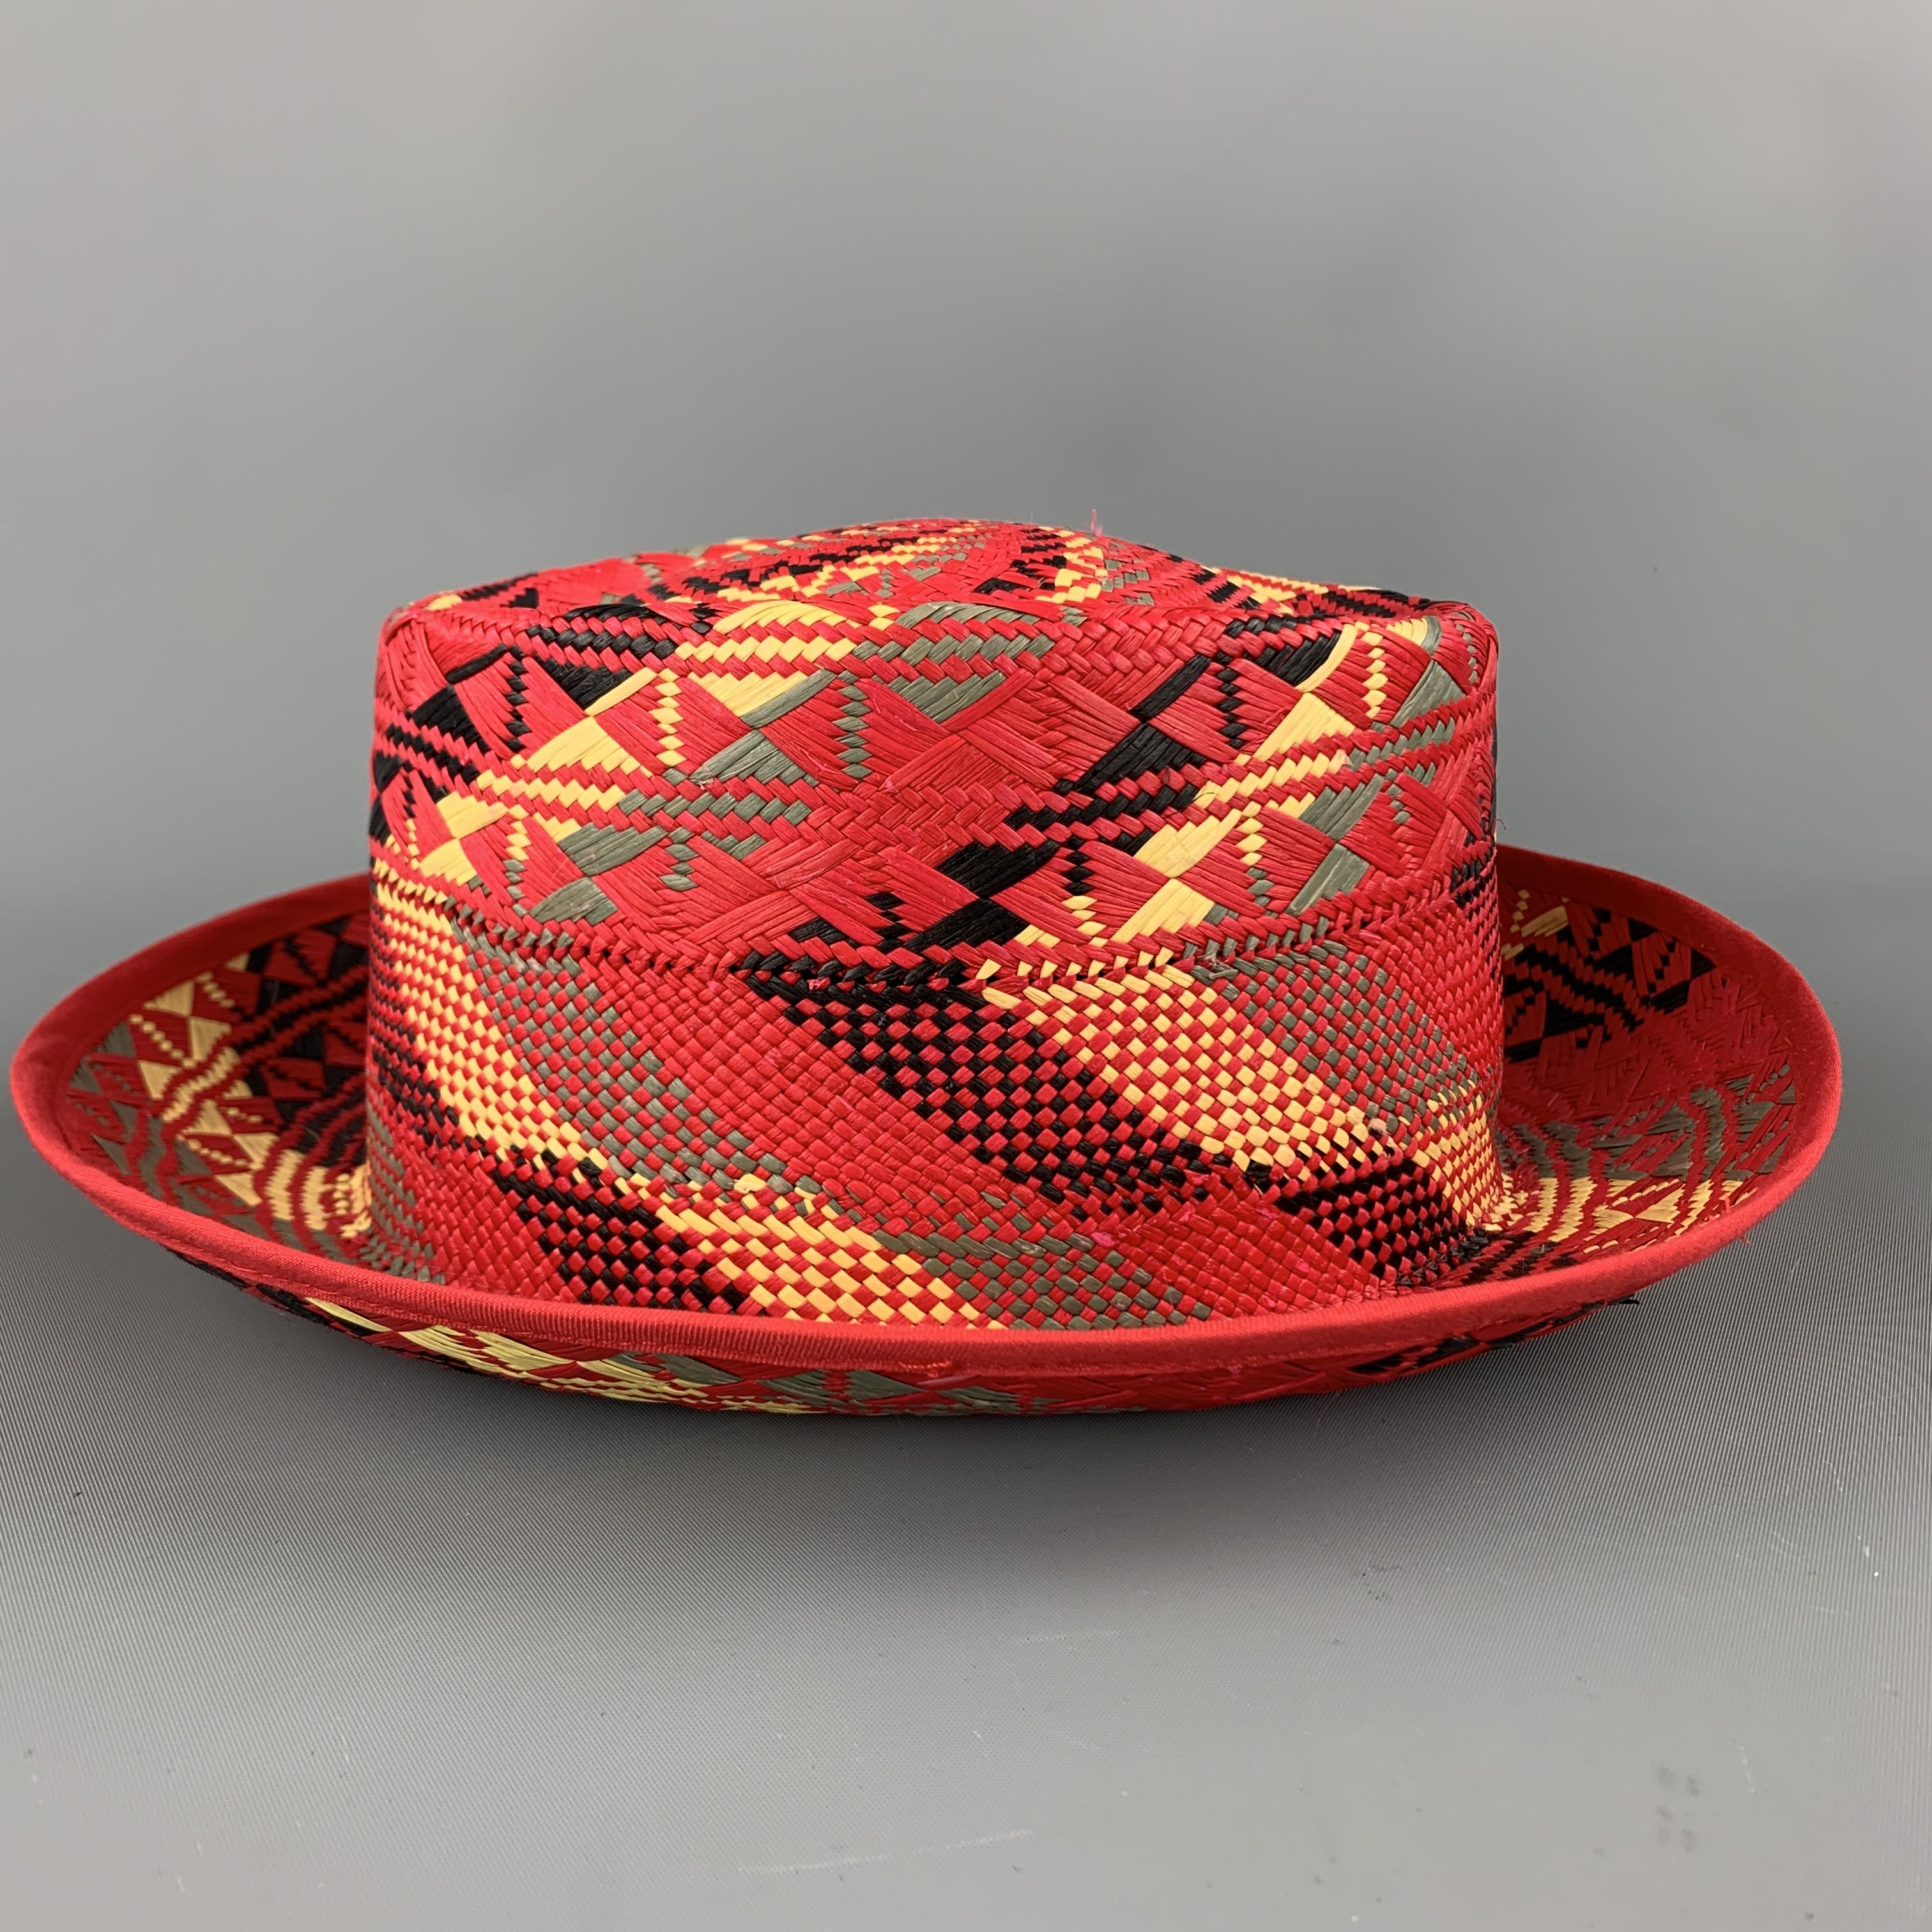 CHAMULA Panama hat comes in bold red woven straw with a black, yellow, and green pattern throughout. Hand woven in Ecuador. 

Excellent Pre-Owned Condition.
Marked: 58

Measurements:

Opening: 23 in.
Brim: 2.5 in.
Height: 4 in.